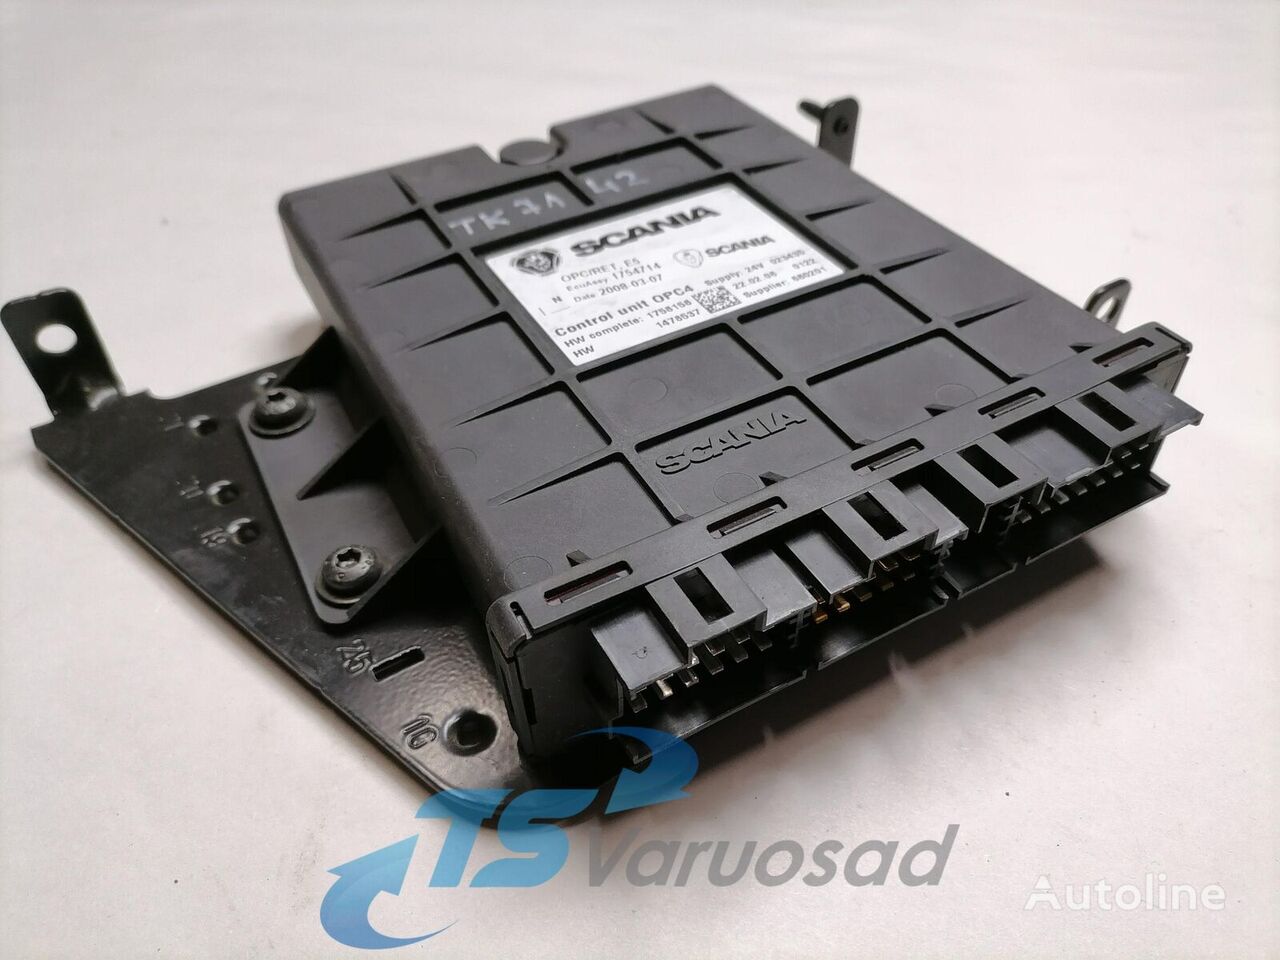 Scania Ecu, GMS OPC4 1754714 control unit for Scania R620 truck tractor